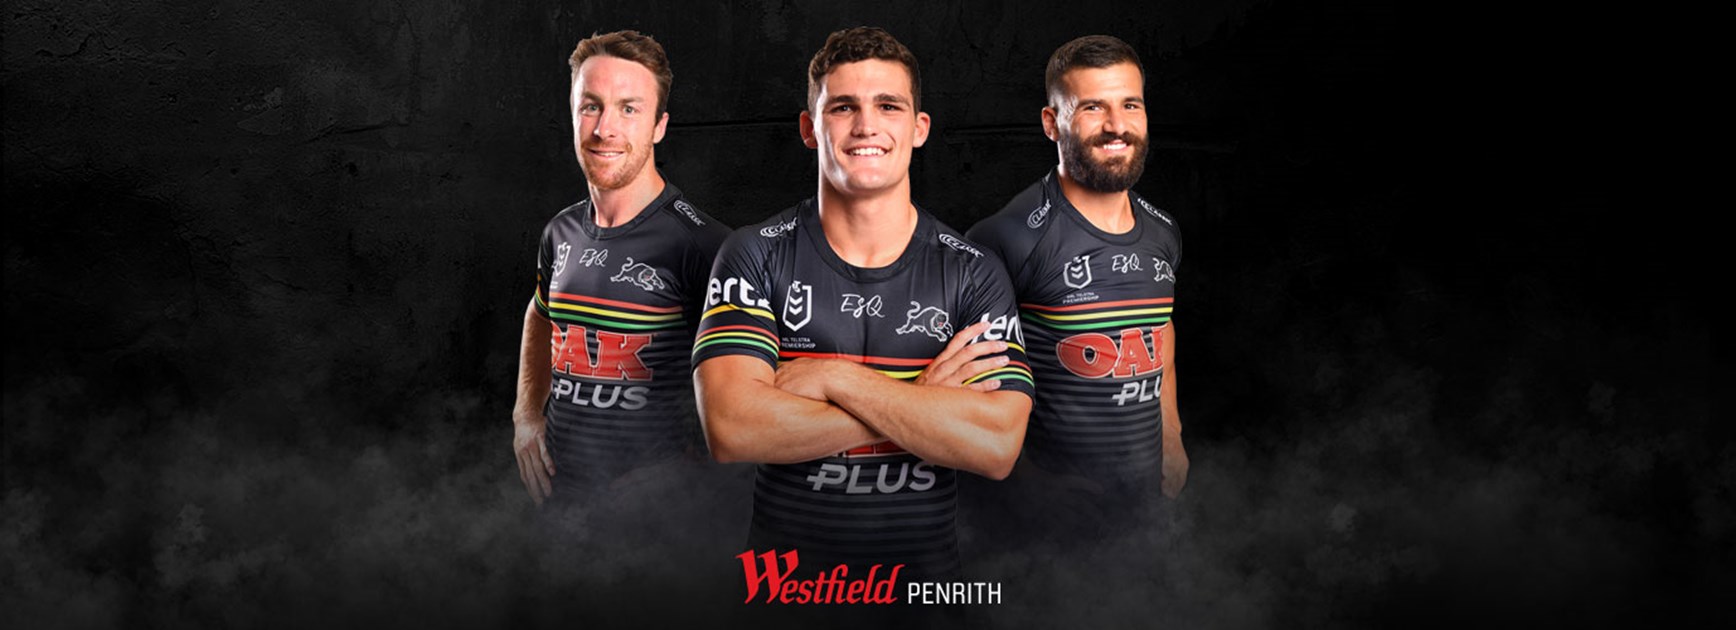 Meet the Panthers at Westfield Penrith